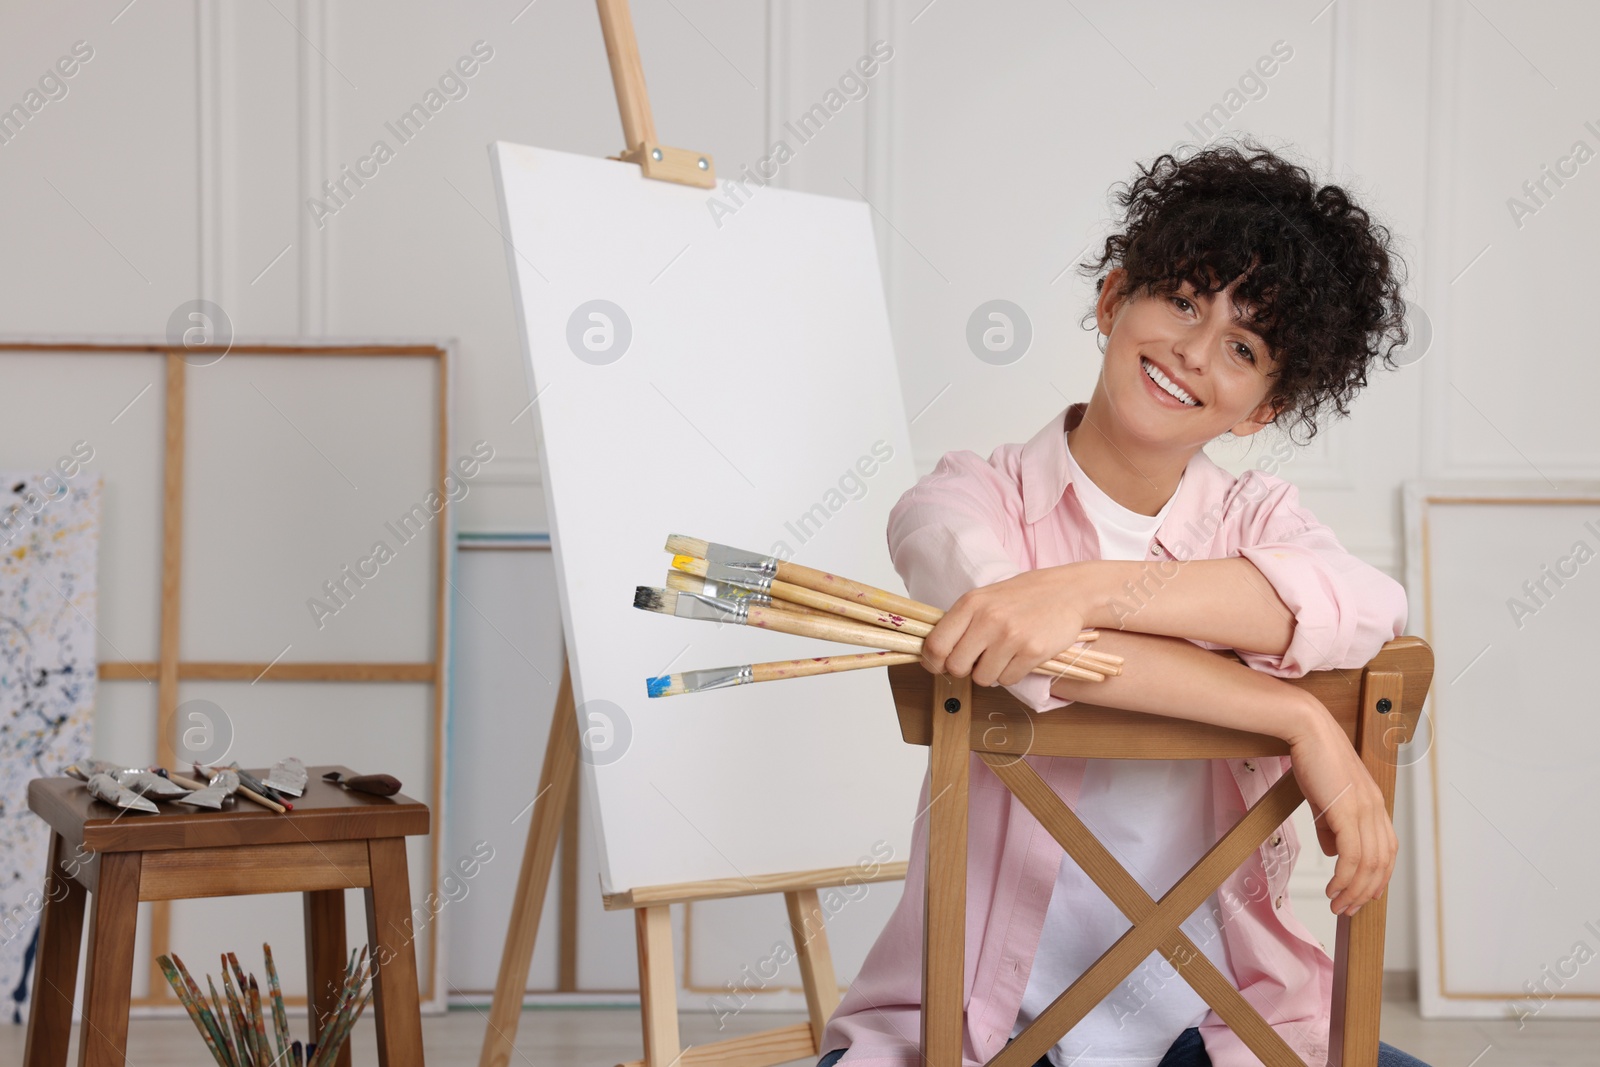 Photo of Young woman holding brushes near easel with canvas in studio